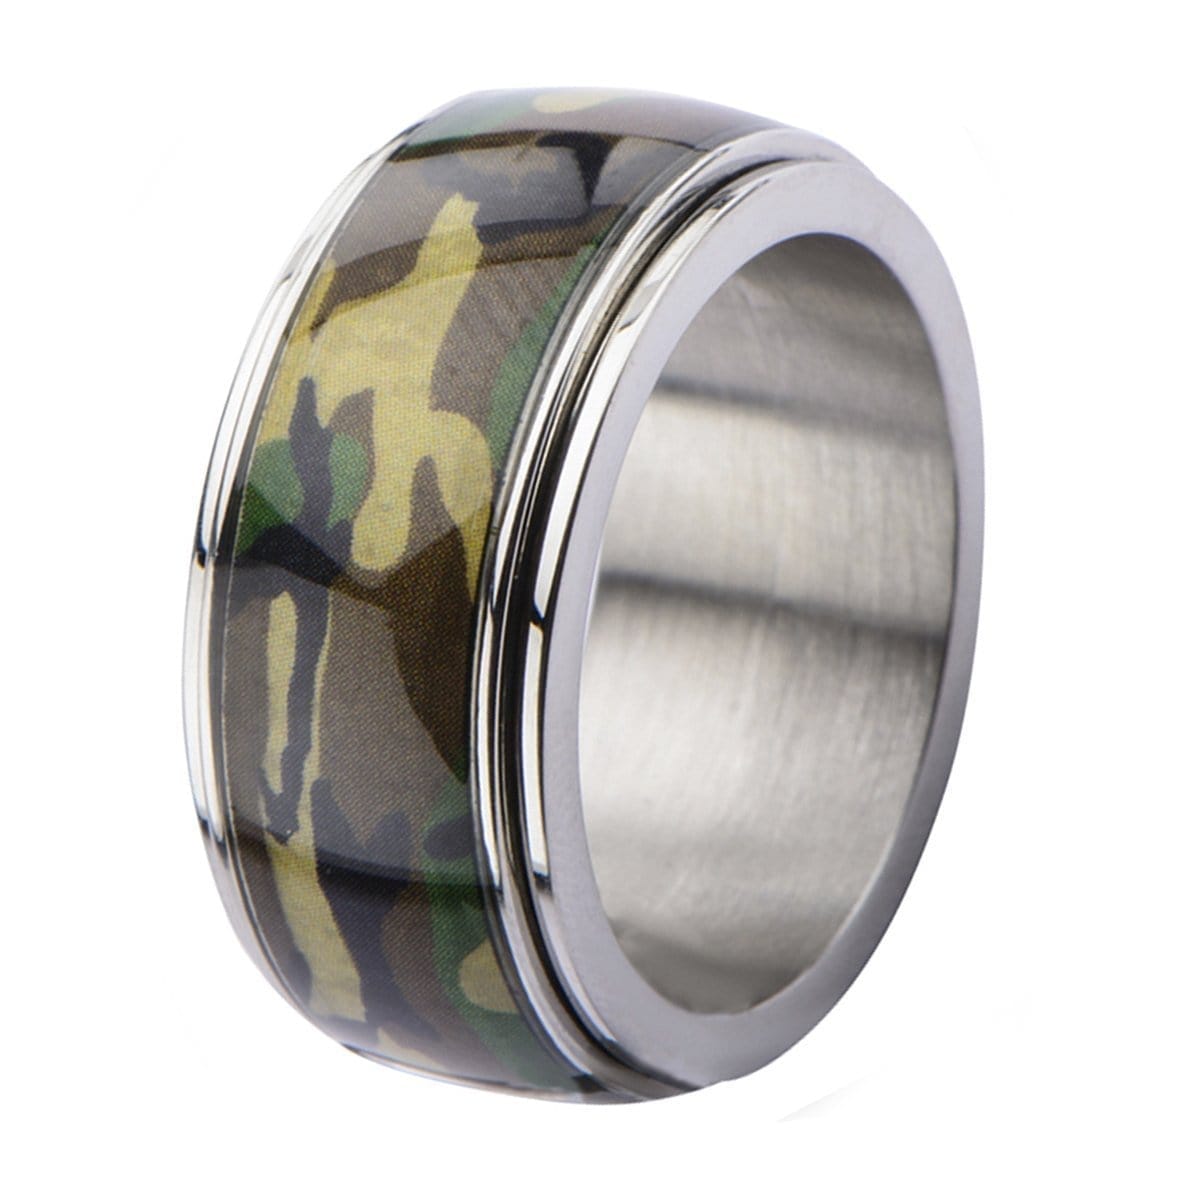 INOX JEWELRY Rings Silver Tone Stainless Steel Army Camo Collection Band